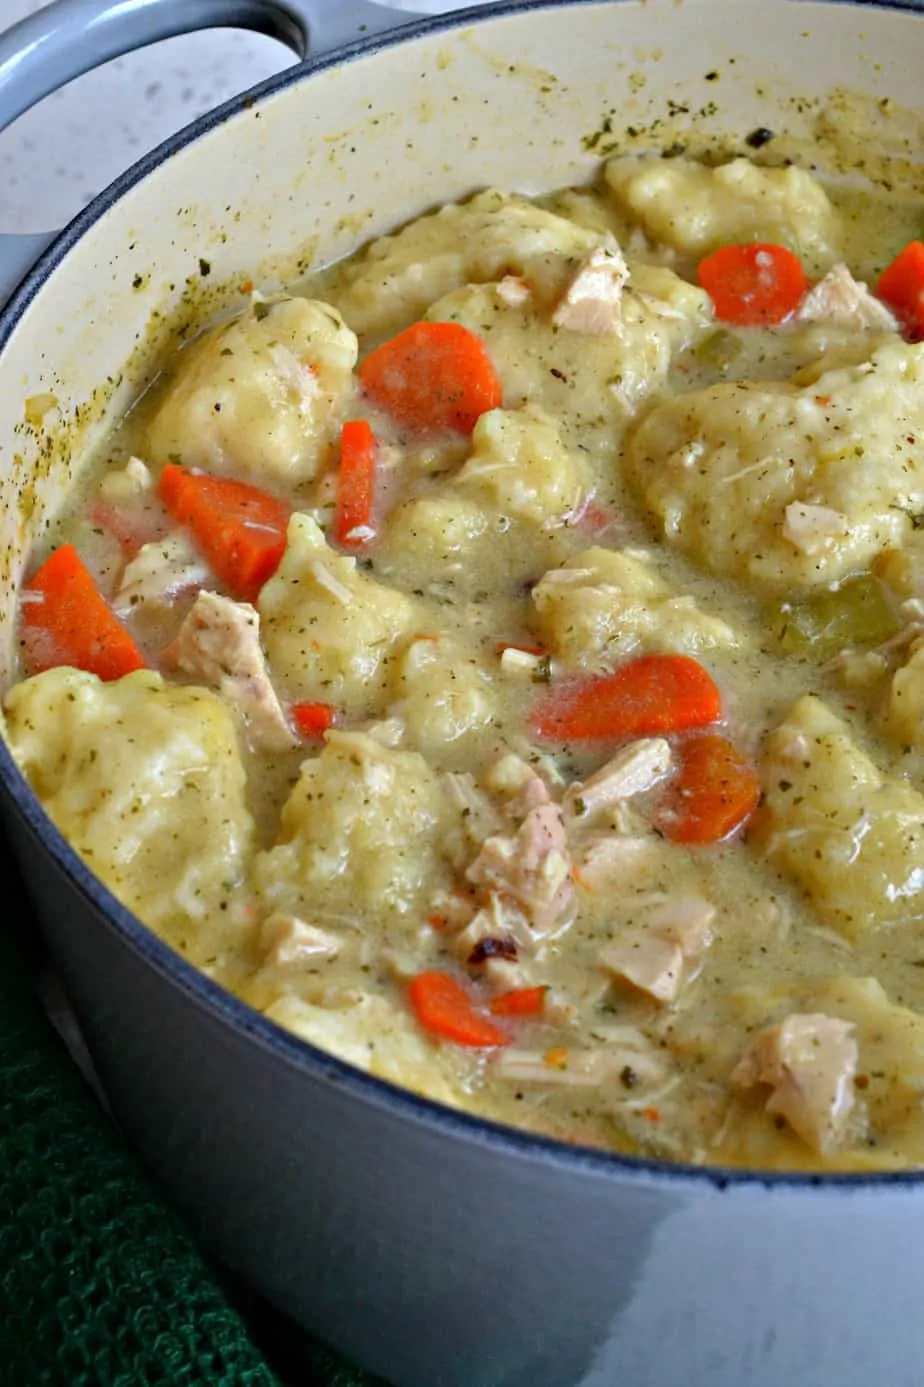 This Chicken and Dumpling Soup recipe is made with creamy broth, succulent chicken, sweet carrots and light fluffy dumplings.